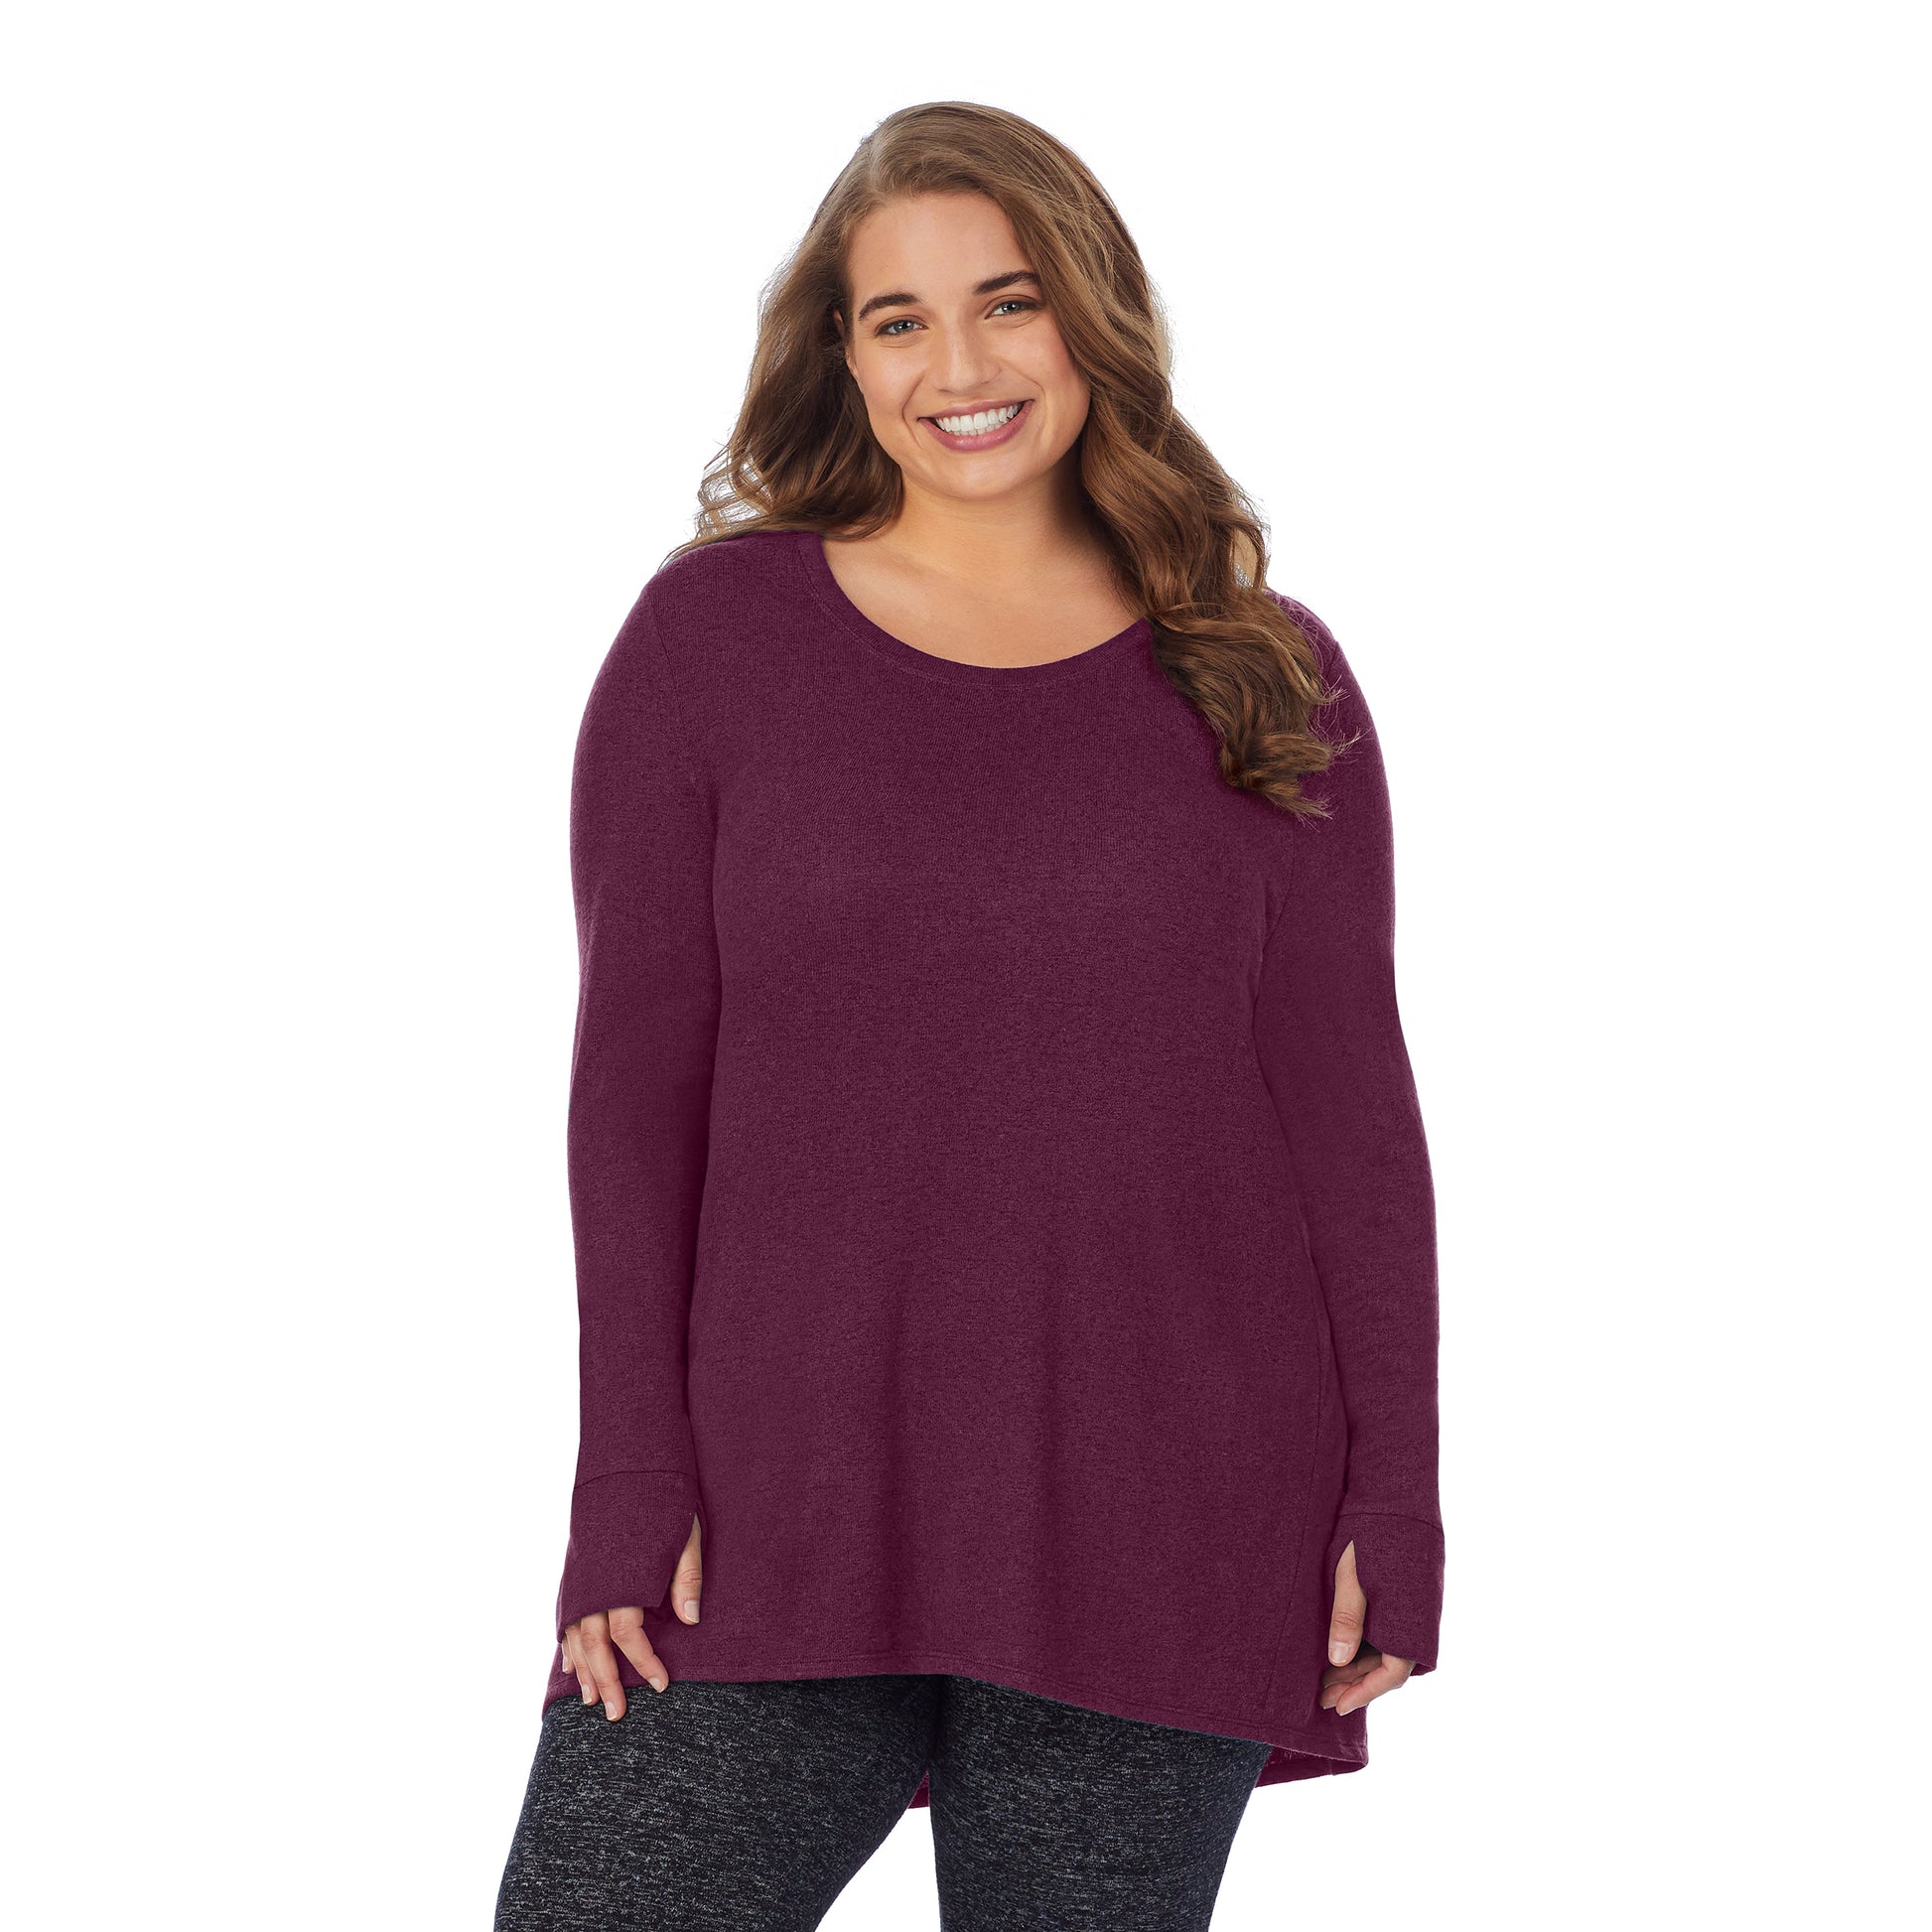 Marled Grape; Model is wearing size 1X. She is 5'7", Bust 42.5", Waist 34.5", Hips 46". @A lady wearing a marled grape long sleeve tunic plus.